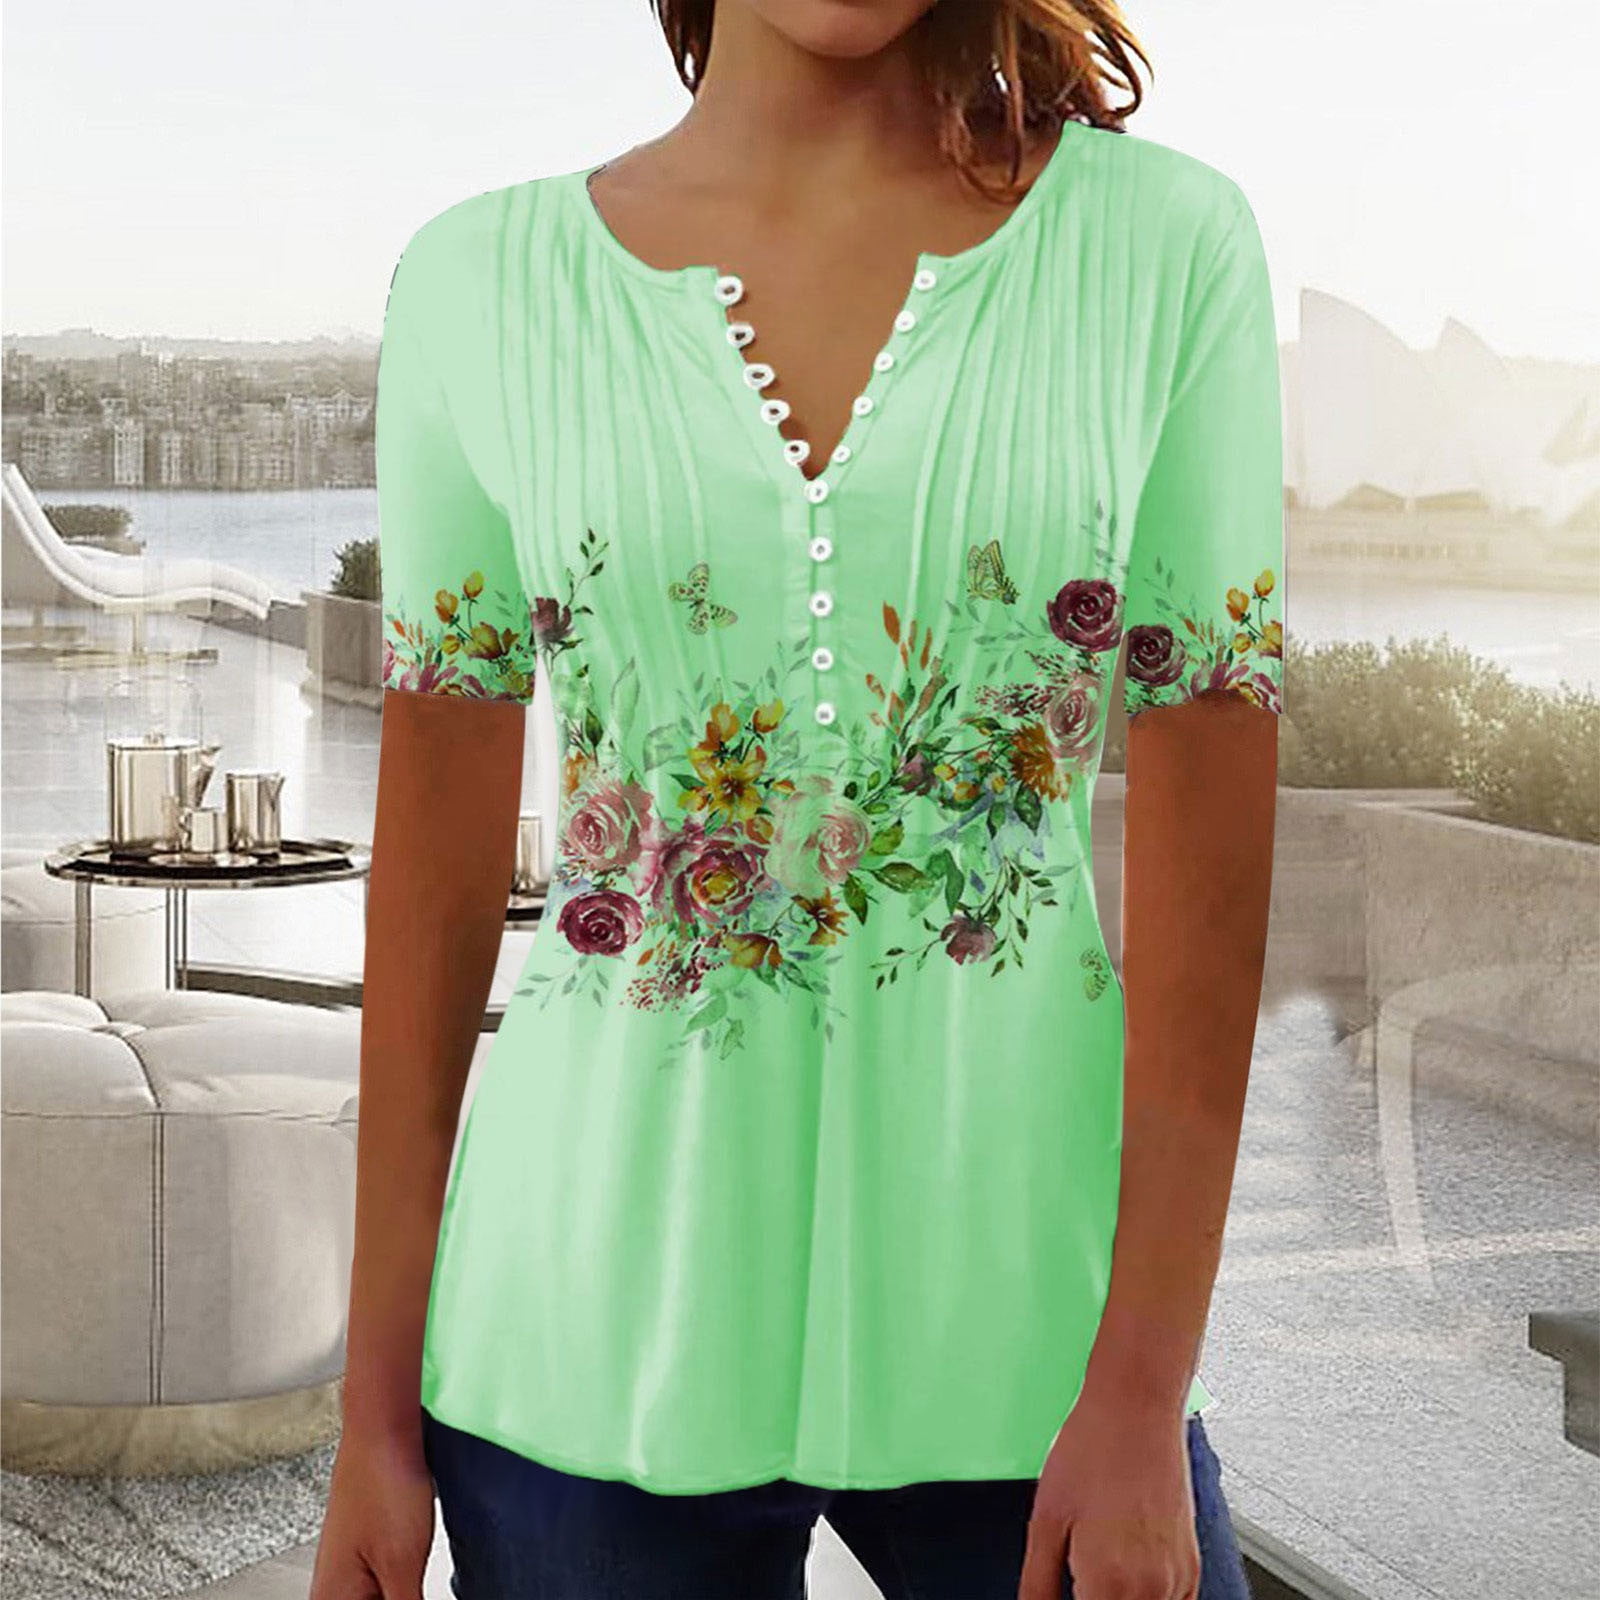 Xihbxyly Tunic Tops for Women Loose Fit, Short Sleeve Shirts for Women  Summer Tunic Tops to Wear Tshirts Loose Casual Blouse Tee Printed Folwy  Shirt, Green, M 1 Dollar Items for Girls #